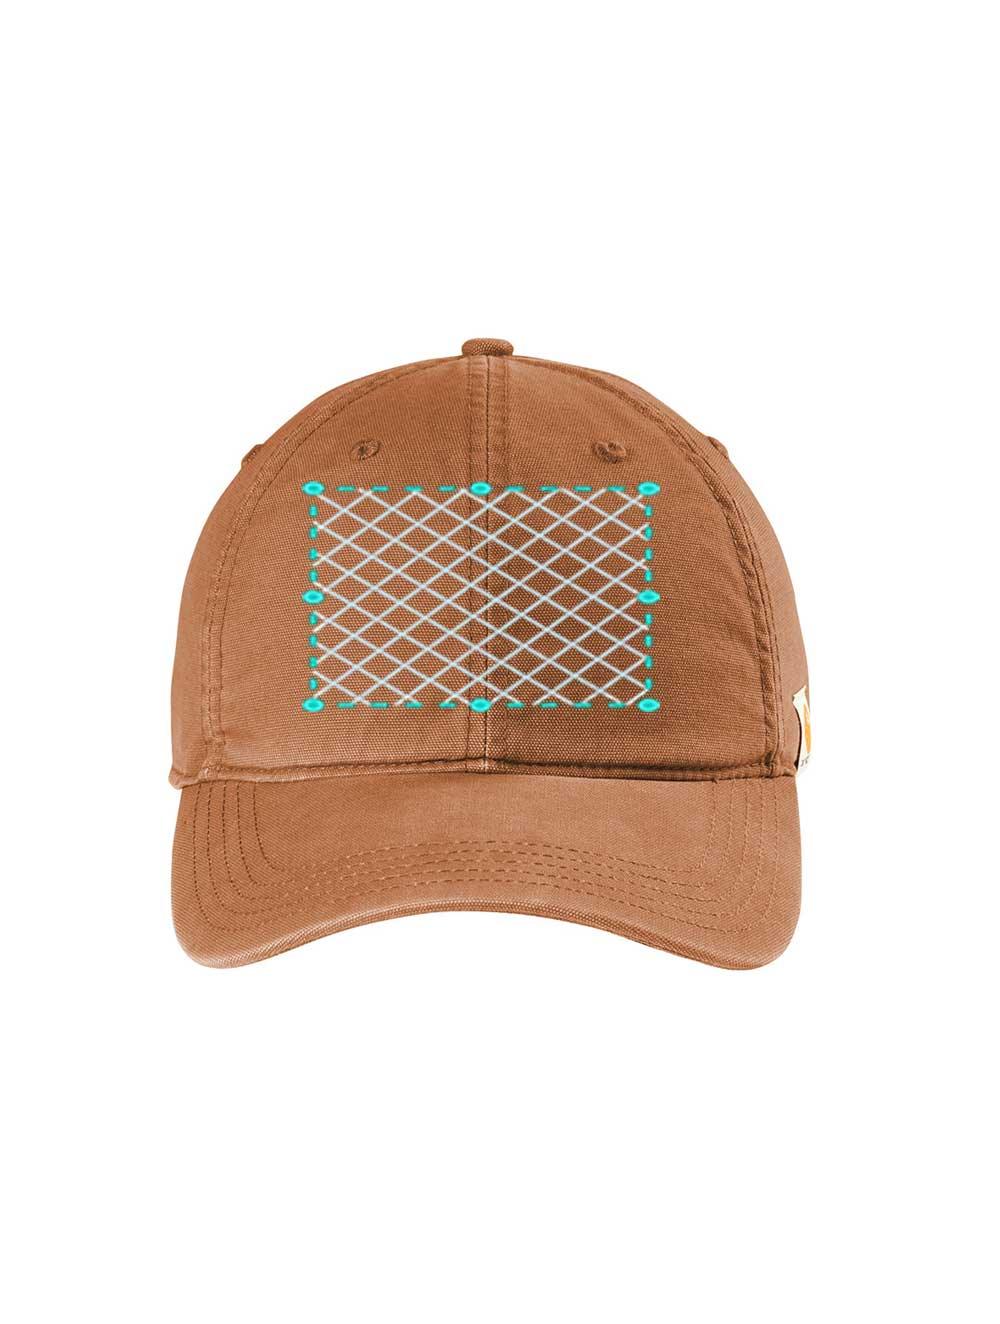 Embroidered Carhartt® Cotton Canvas Cap - Constantly Create Shop